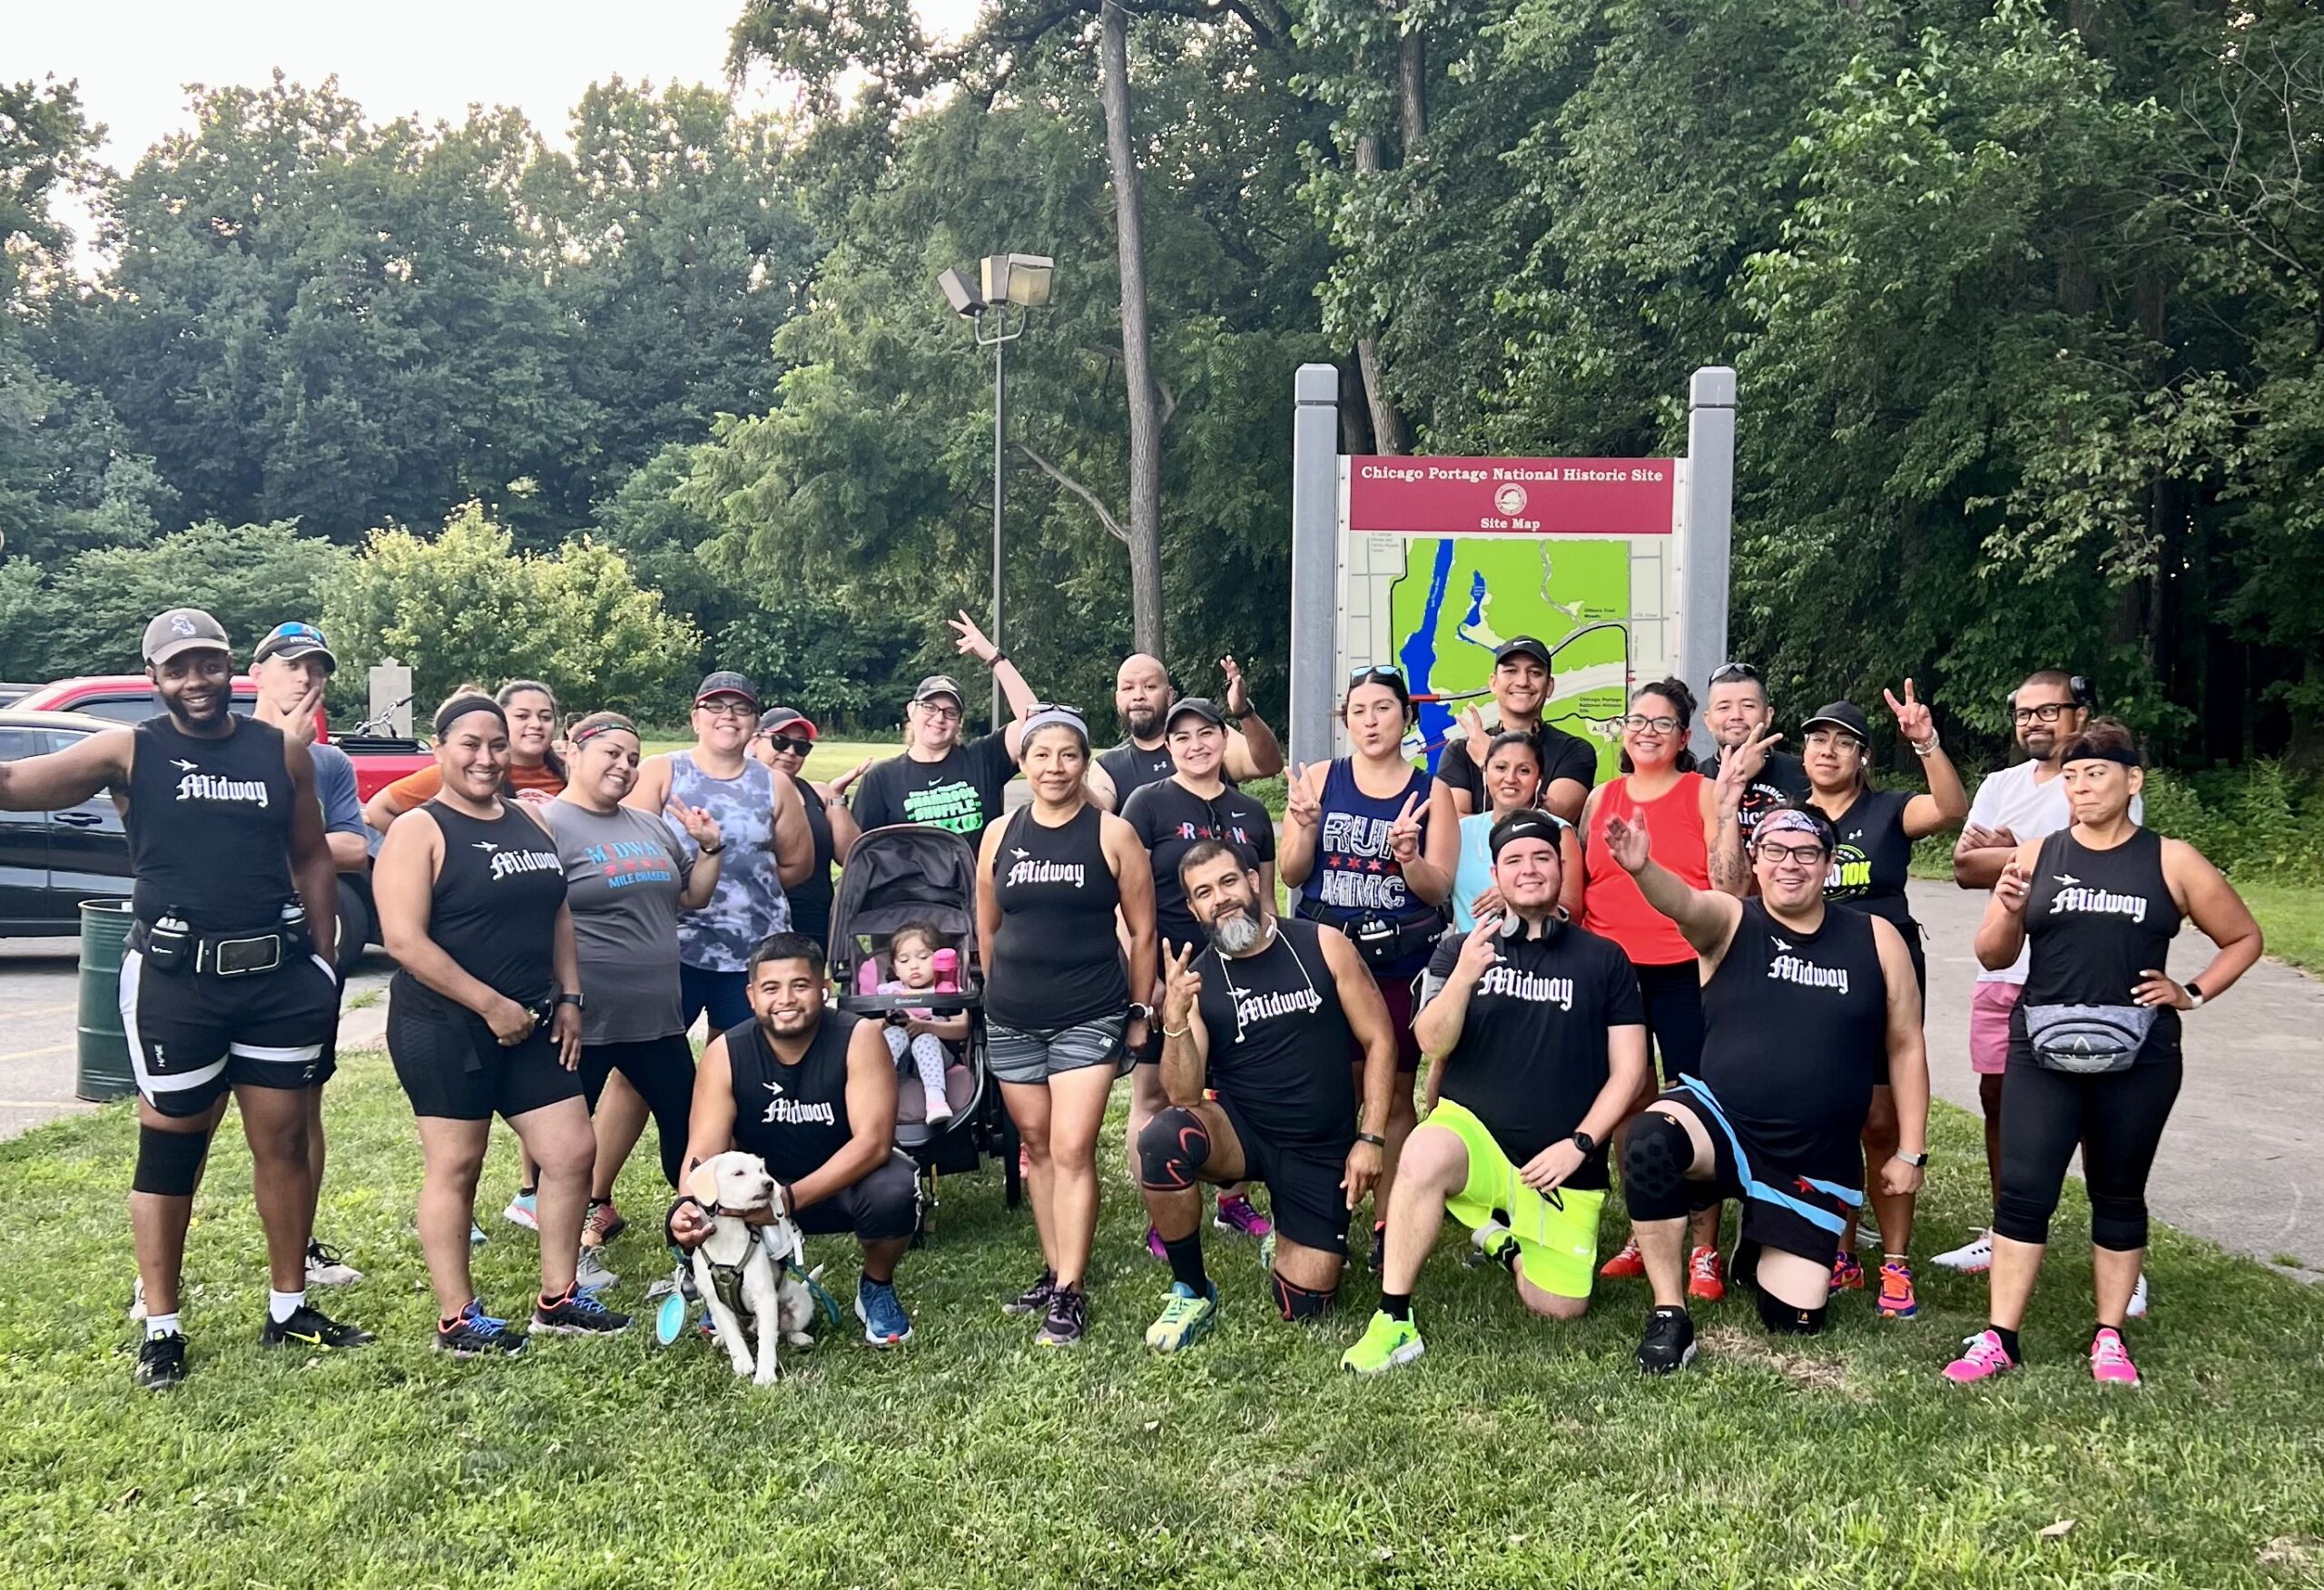 A group photo of the Midway Mile Chasers in front of the Chicago Portage National Historic Site where they had just gone for a long nature run. There are over 20 people smiling and holding up peace signs, almost all wearing matching black tank tops that say "Midway" on them in white text.